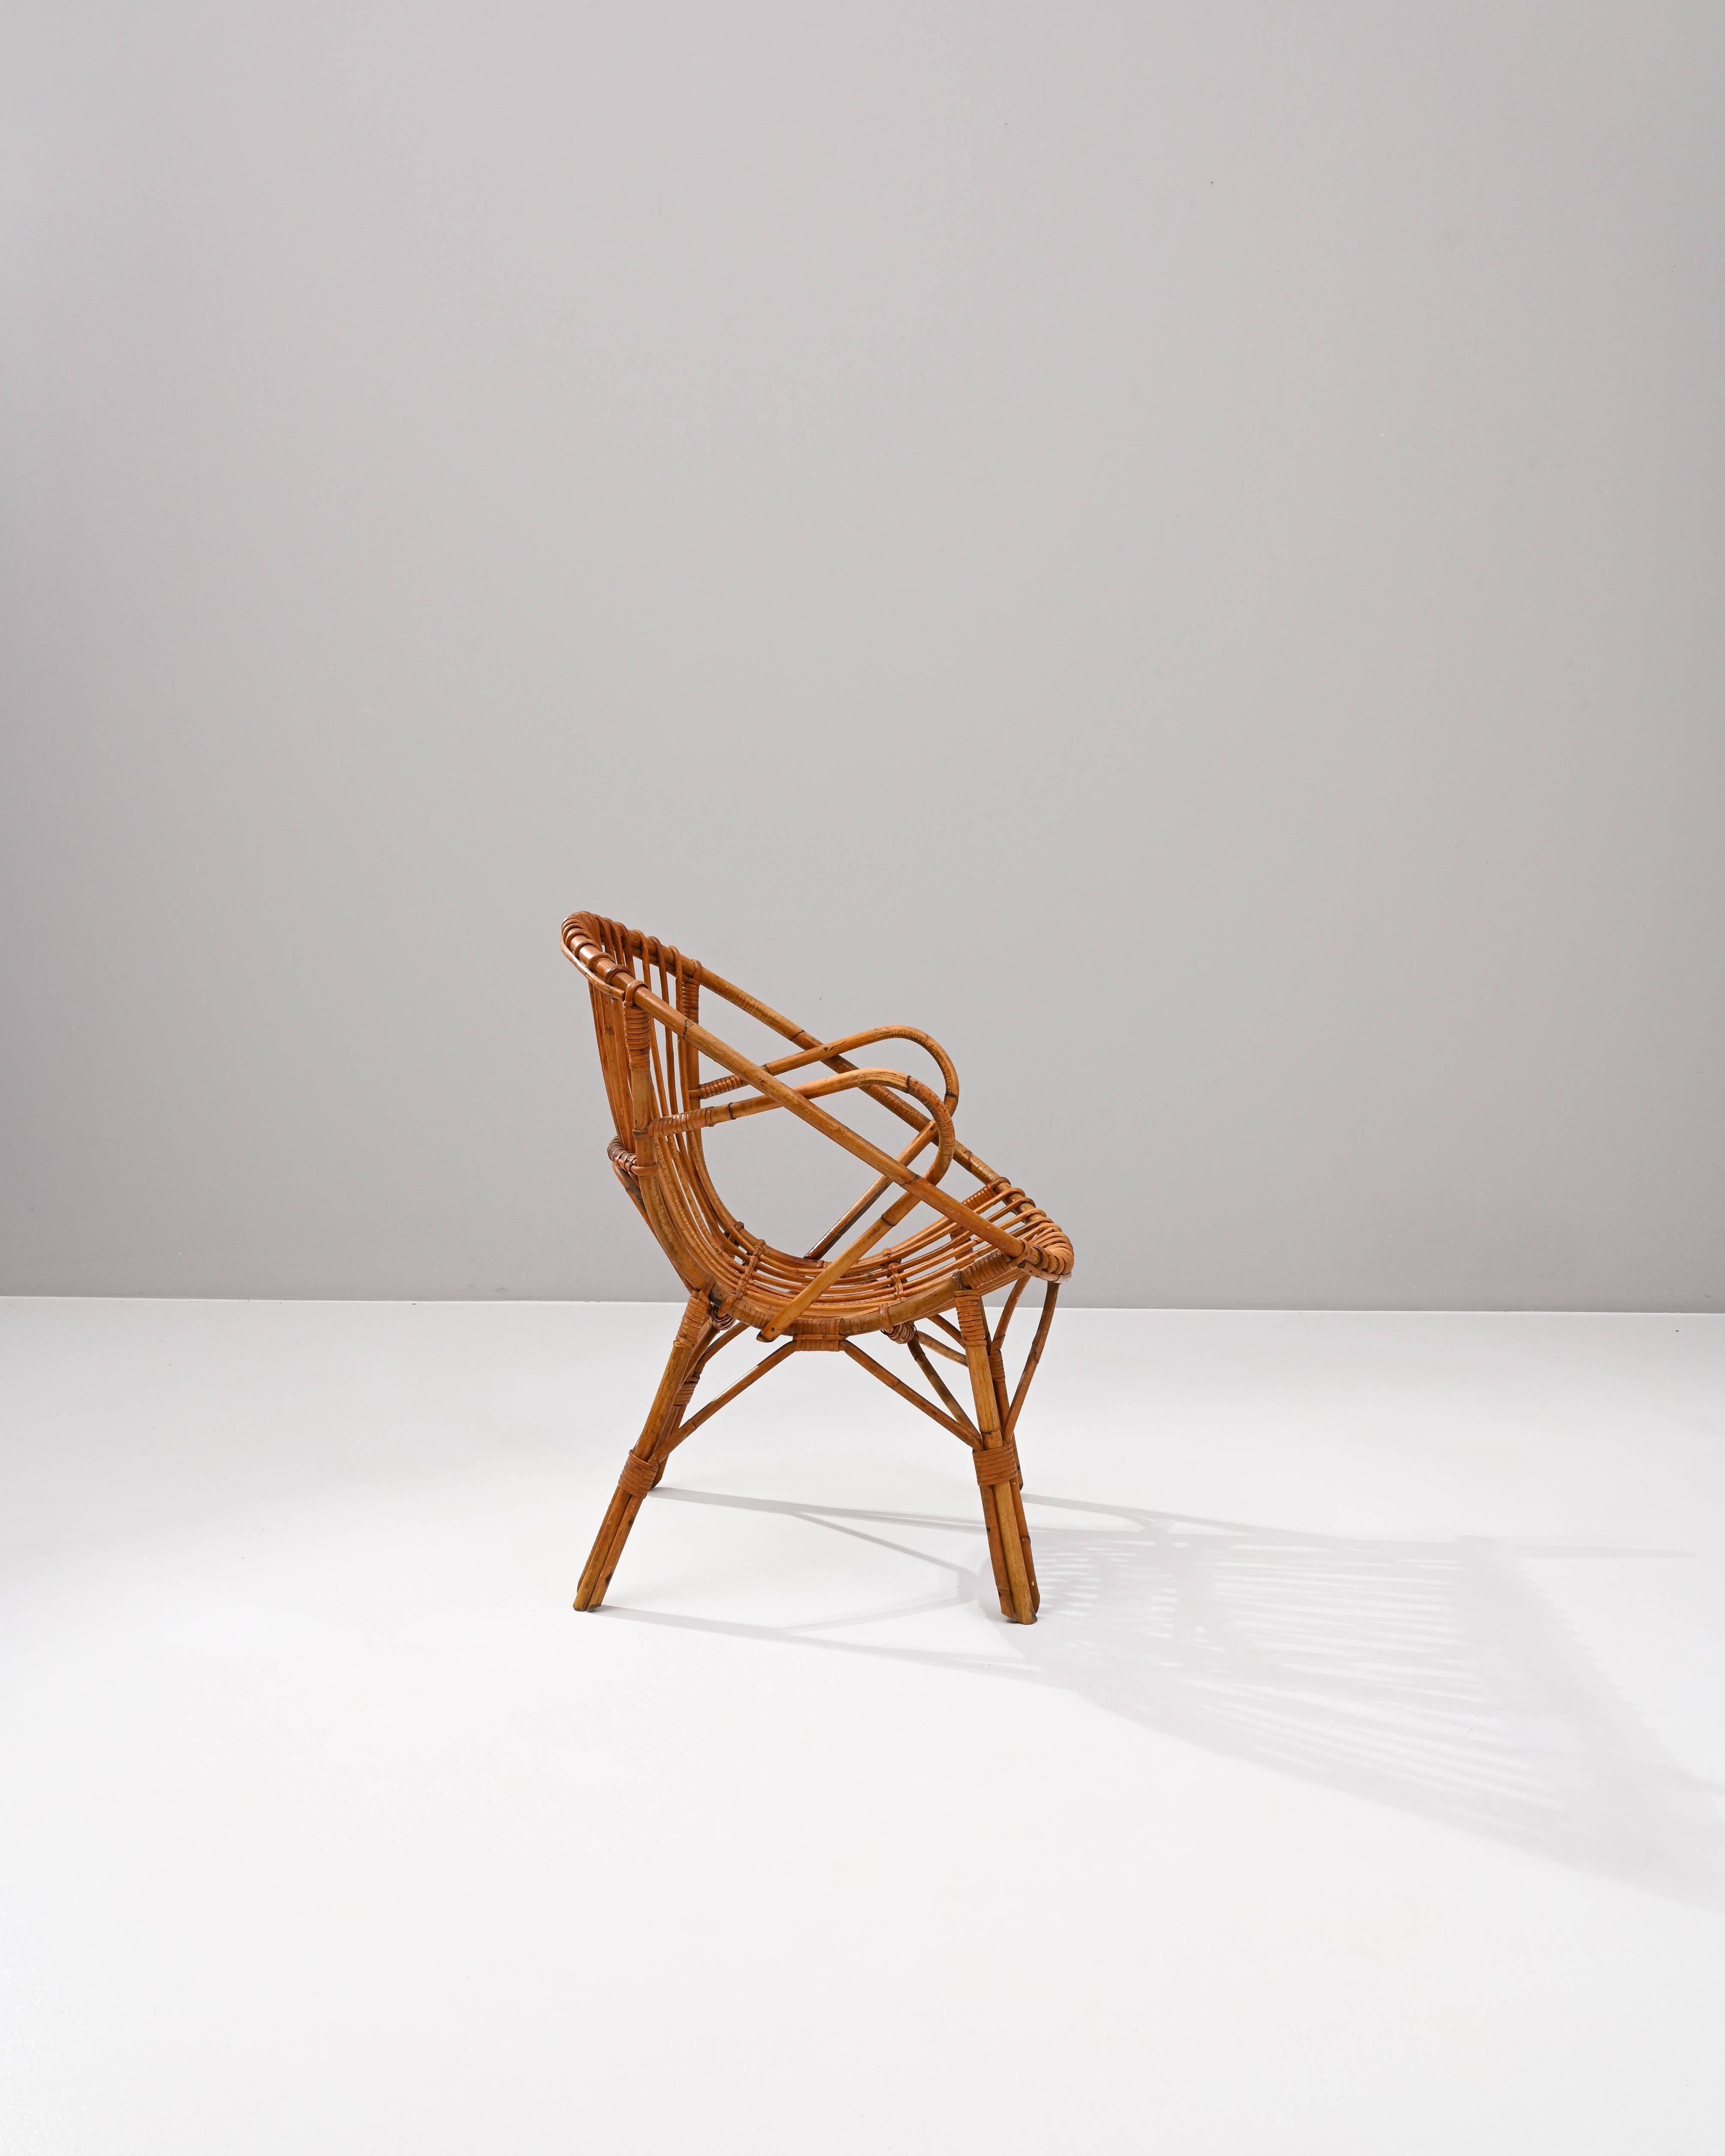 A wooden armchair from France, circa 1960. This French-made armchair is a playful twist on a midcentury classic. Using lashed together rattan, artisans have crafted a chair both geometrically pleasing and surprisingly comfortable. Created by looping